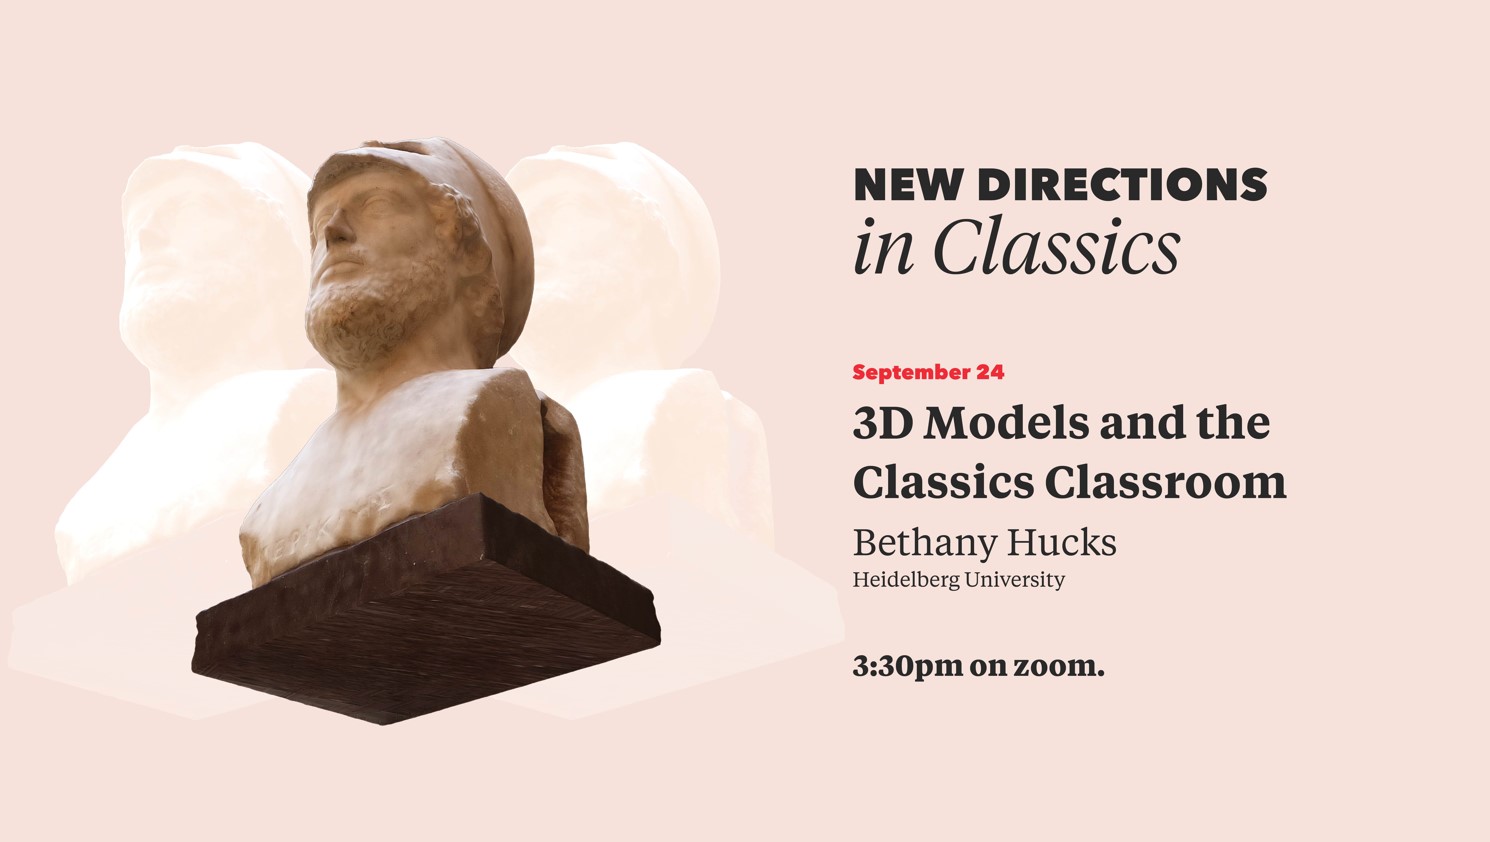 Promo image for Sept 24 New Directions in Classics lecture, full text on web page